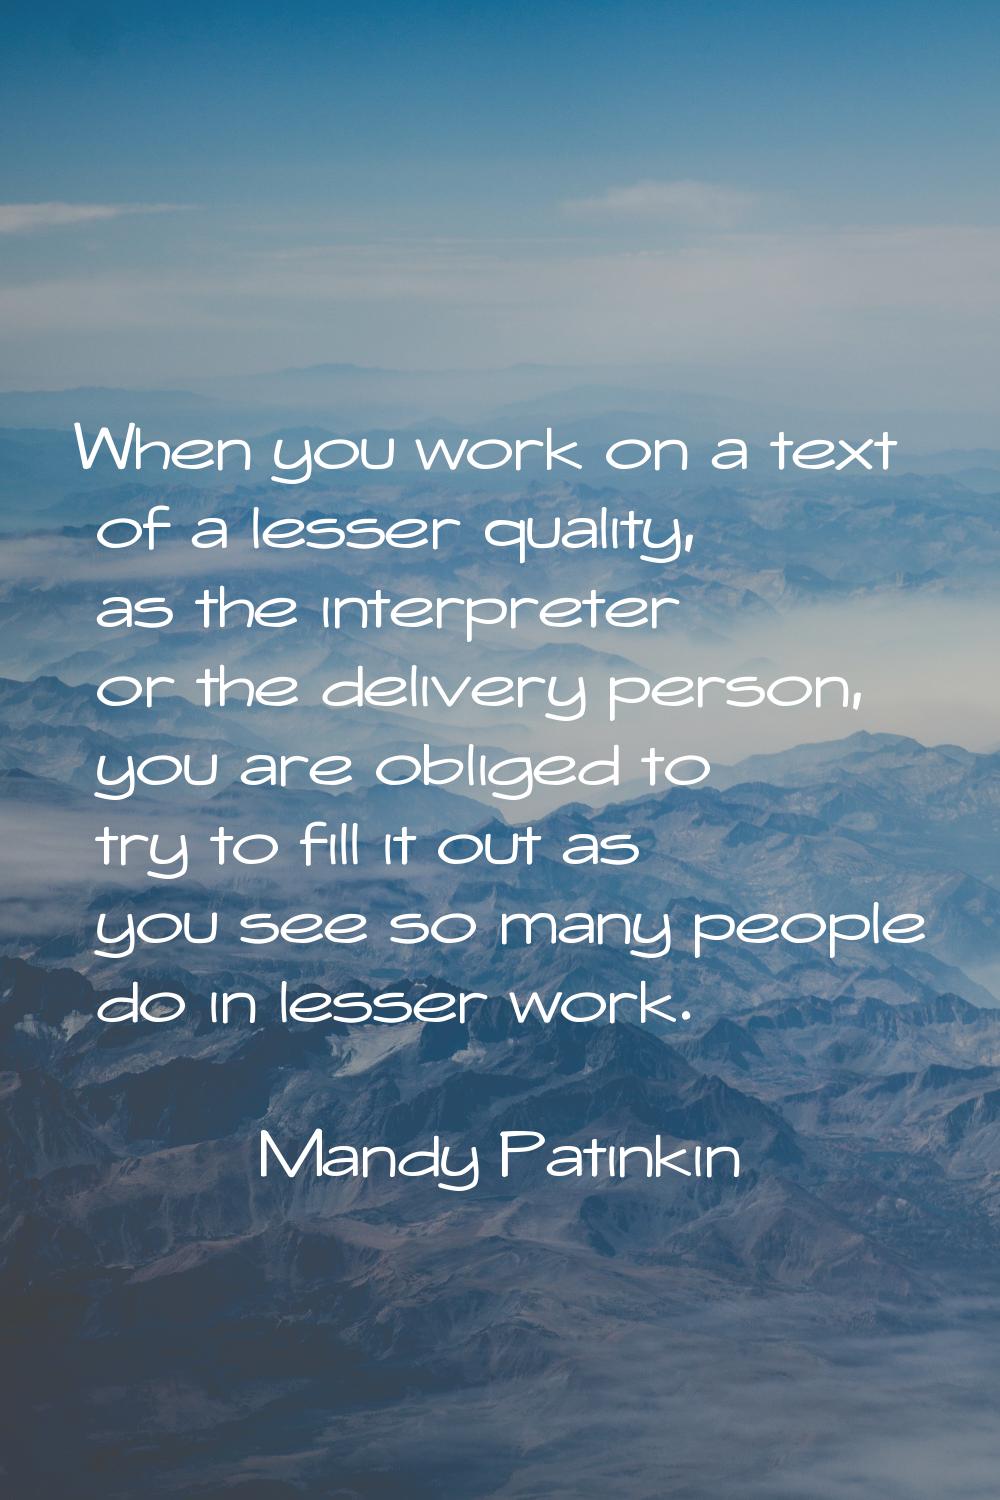 When you work on a text of a lesser quality, as the interpreter or the delivery person, you are obl